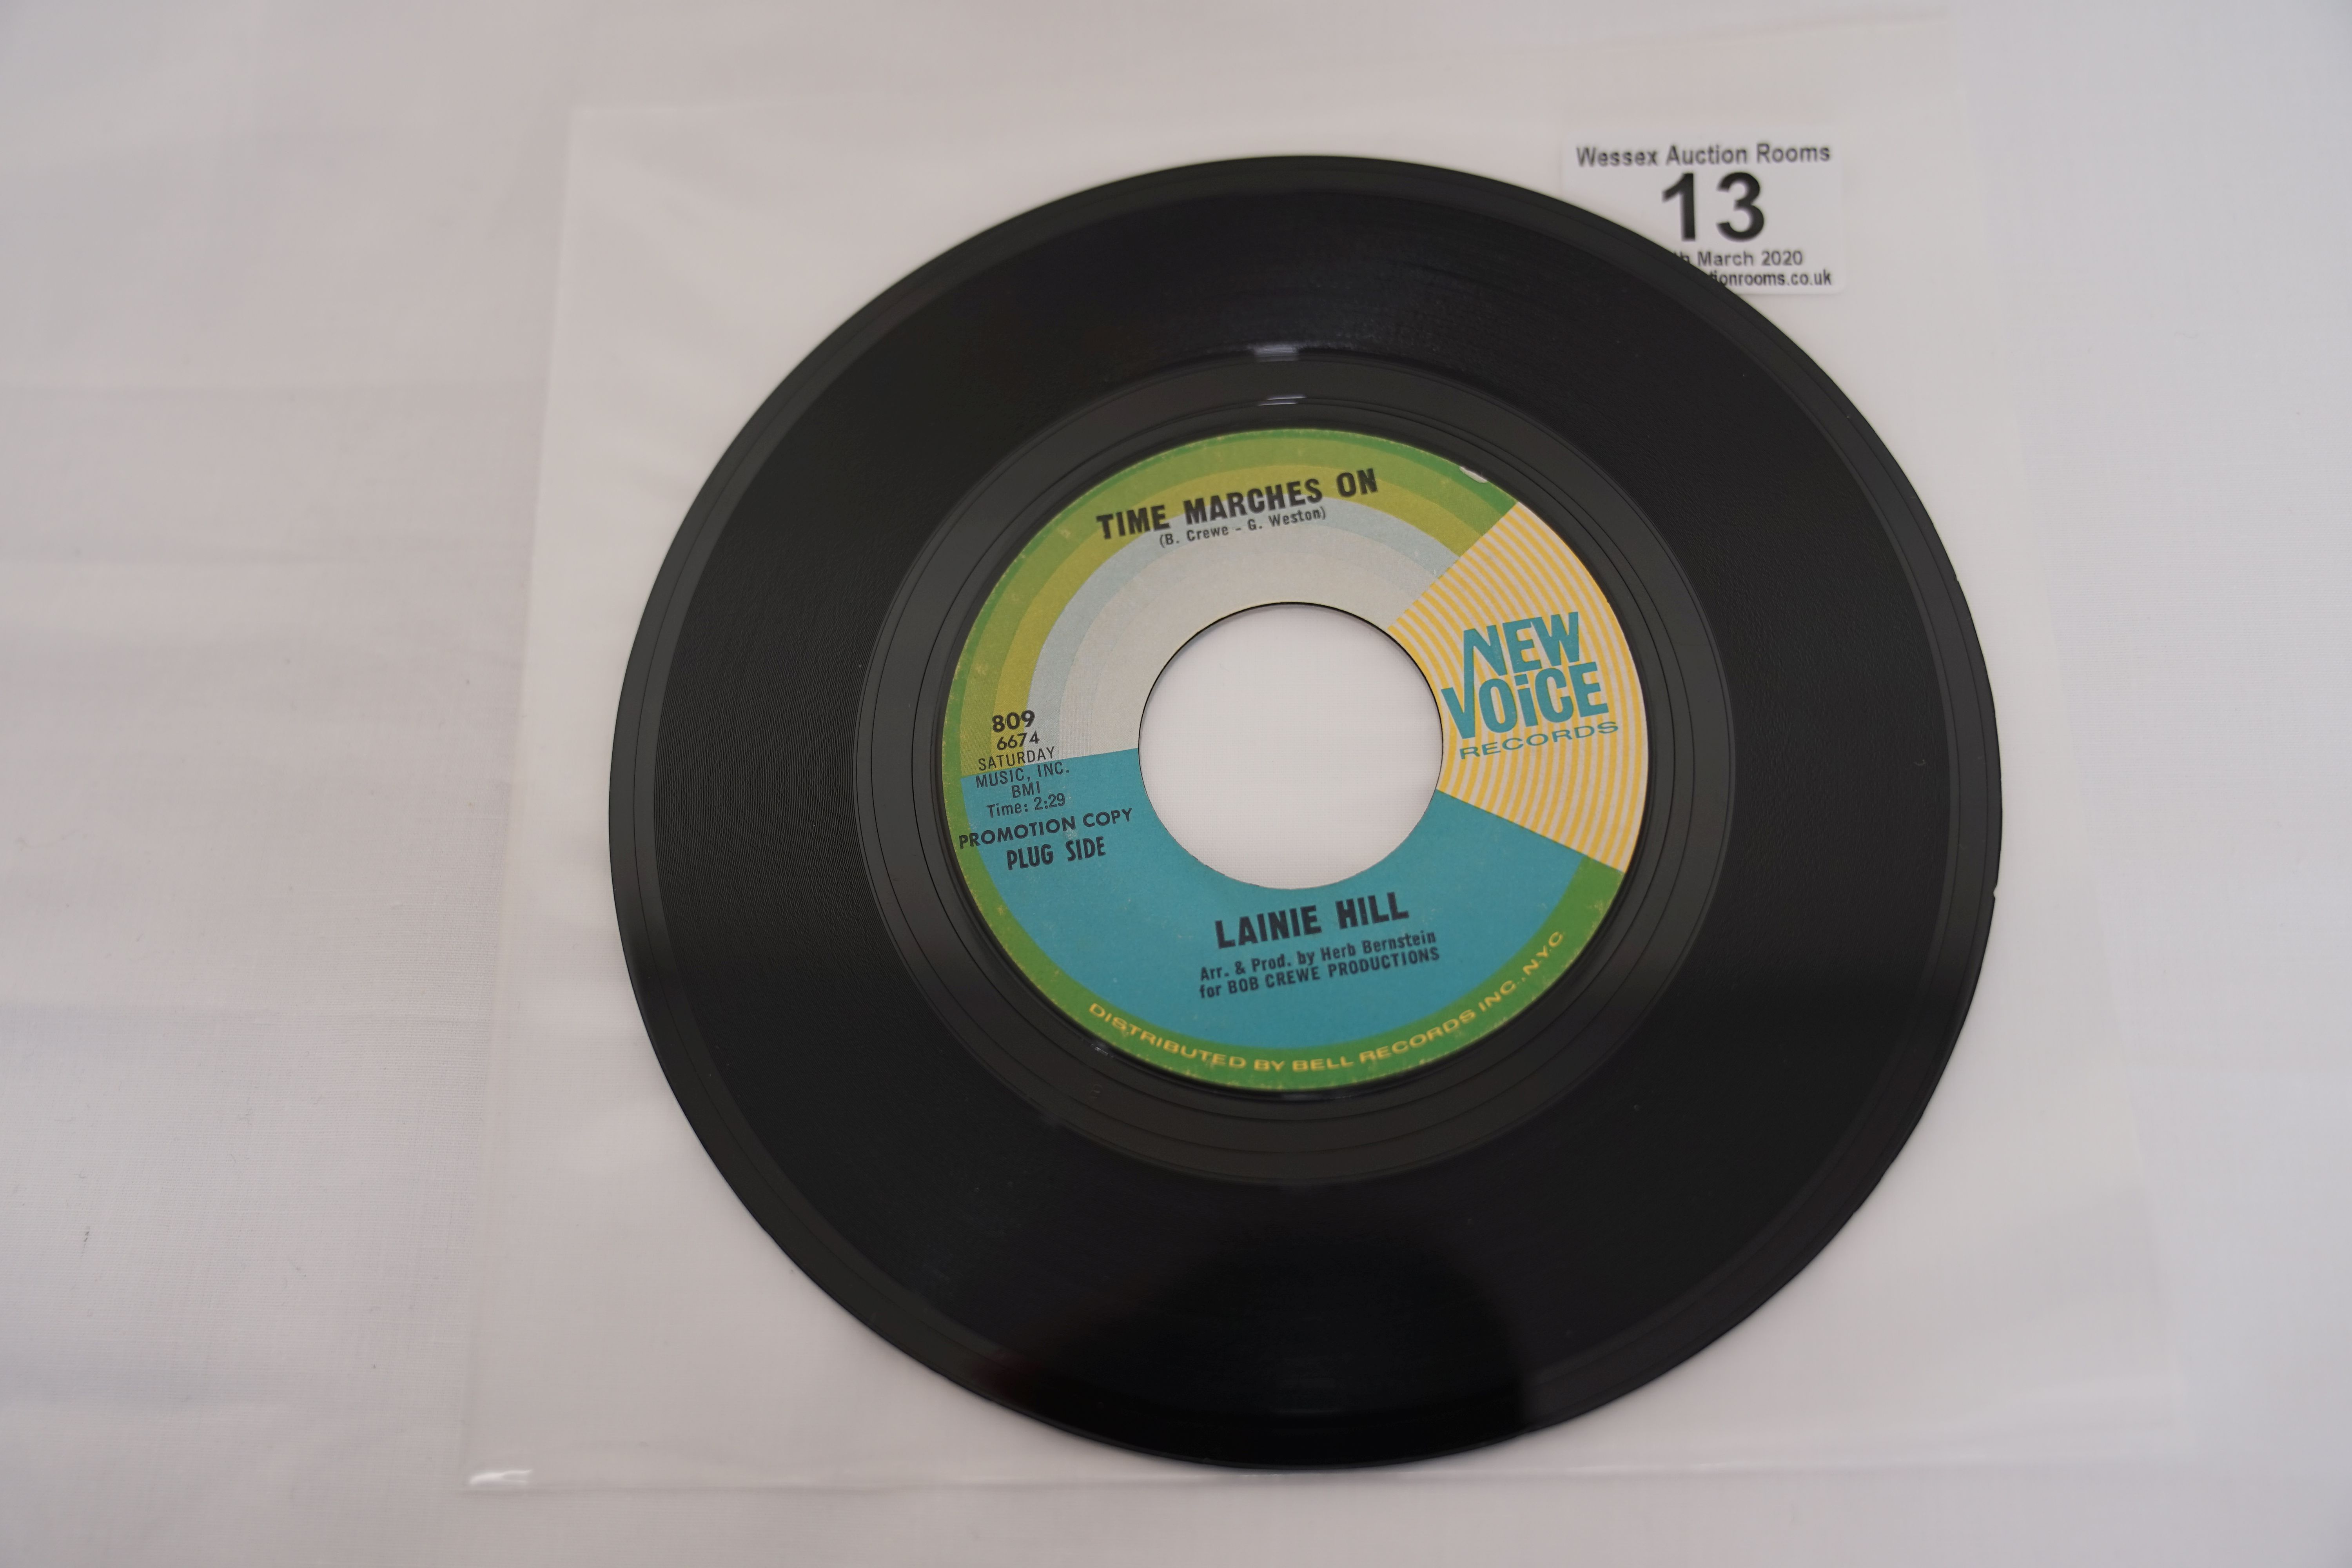 Vinyl - Lainie Hill - Time Marches On (New Voice Records 809 Promo) NM archive. Original US 1st - Image 4 of 5